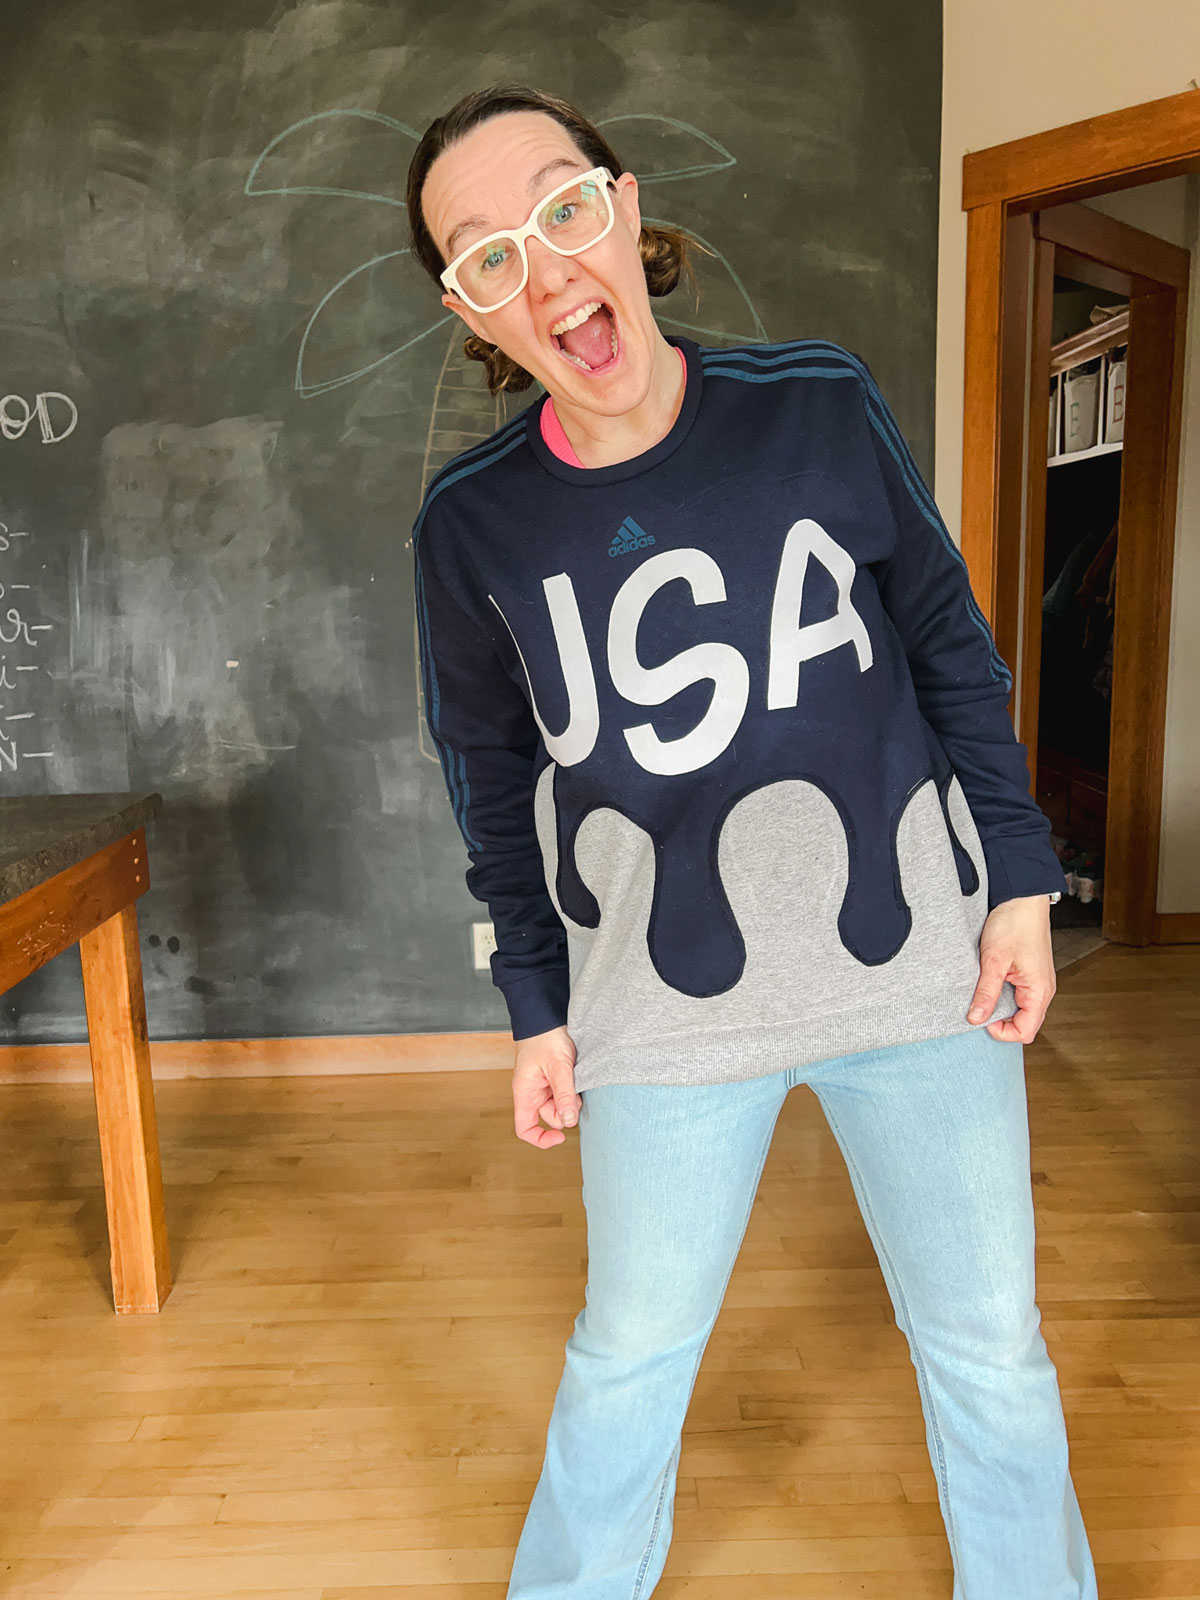 how to make a rework sweatshirt, no sew rework sweatshirt, usa patriotic sweatshirt, sewing sweatshirt, sewing project